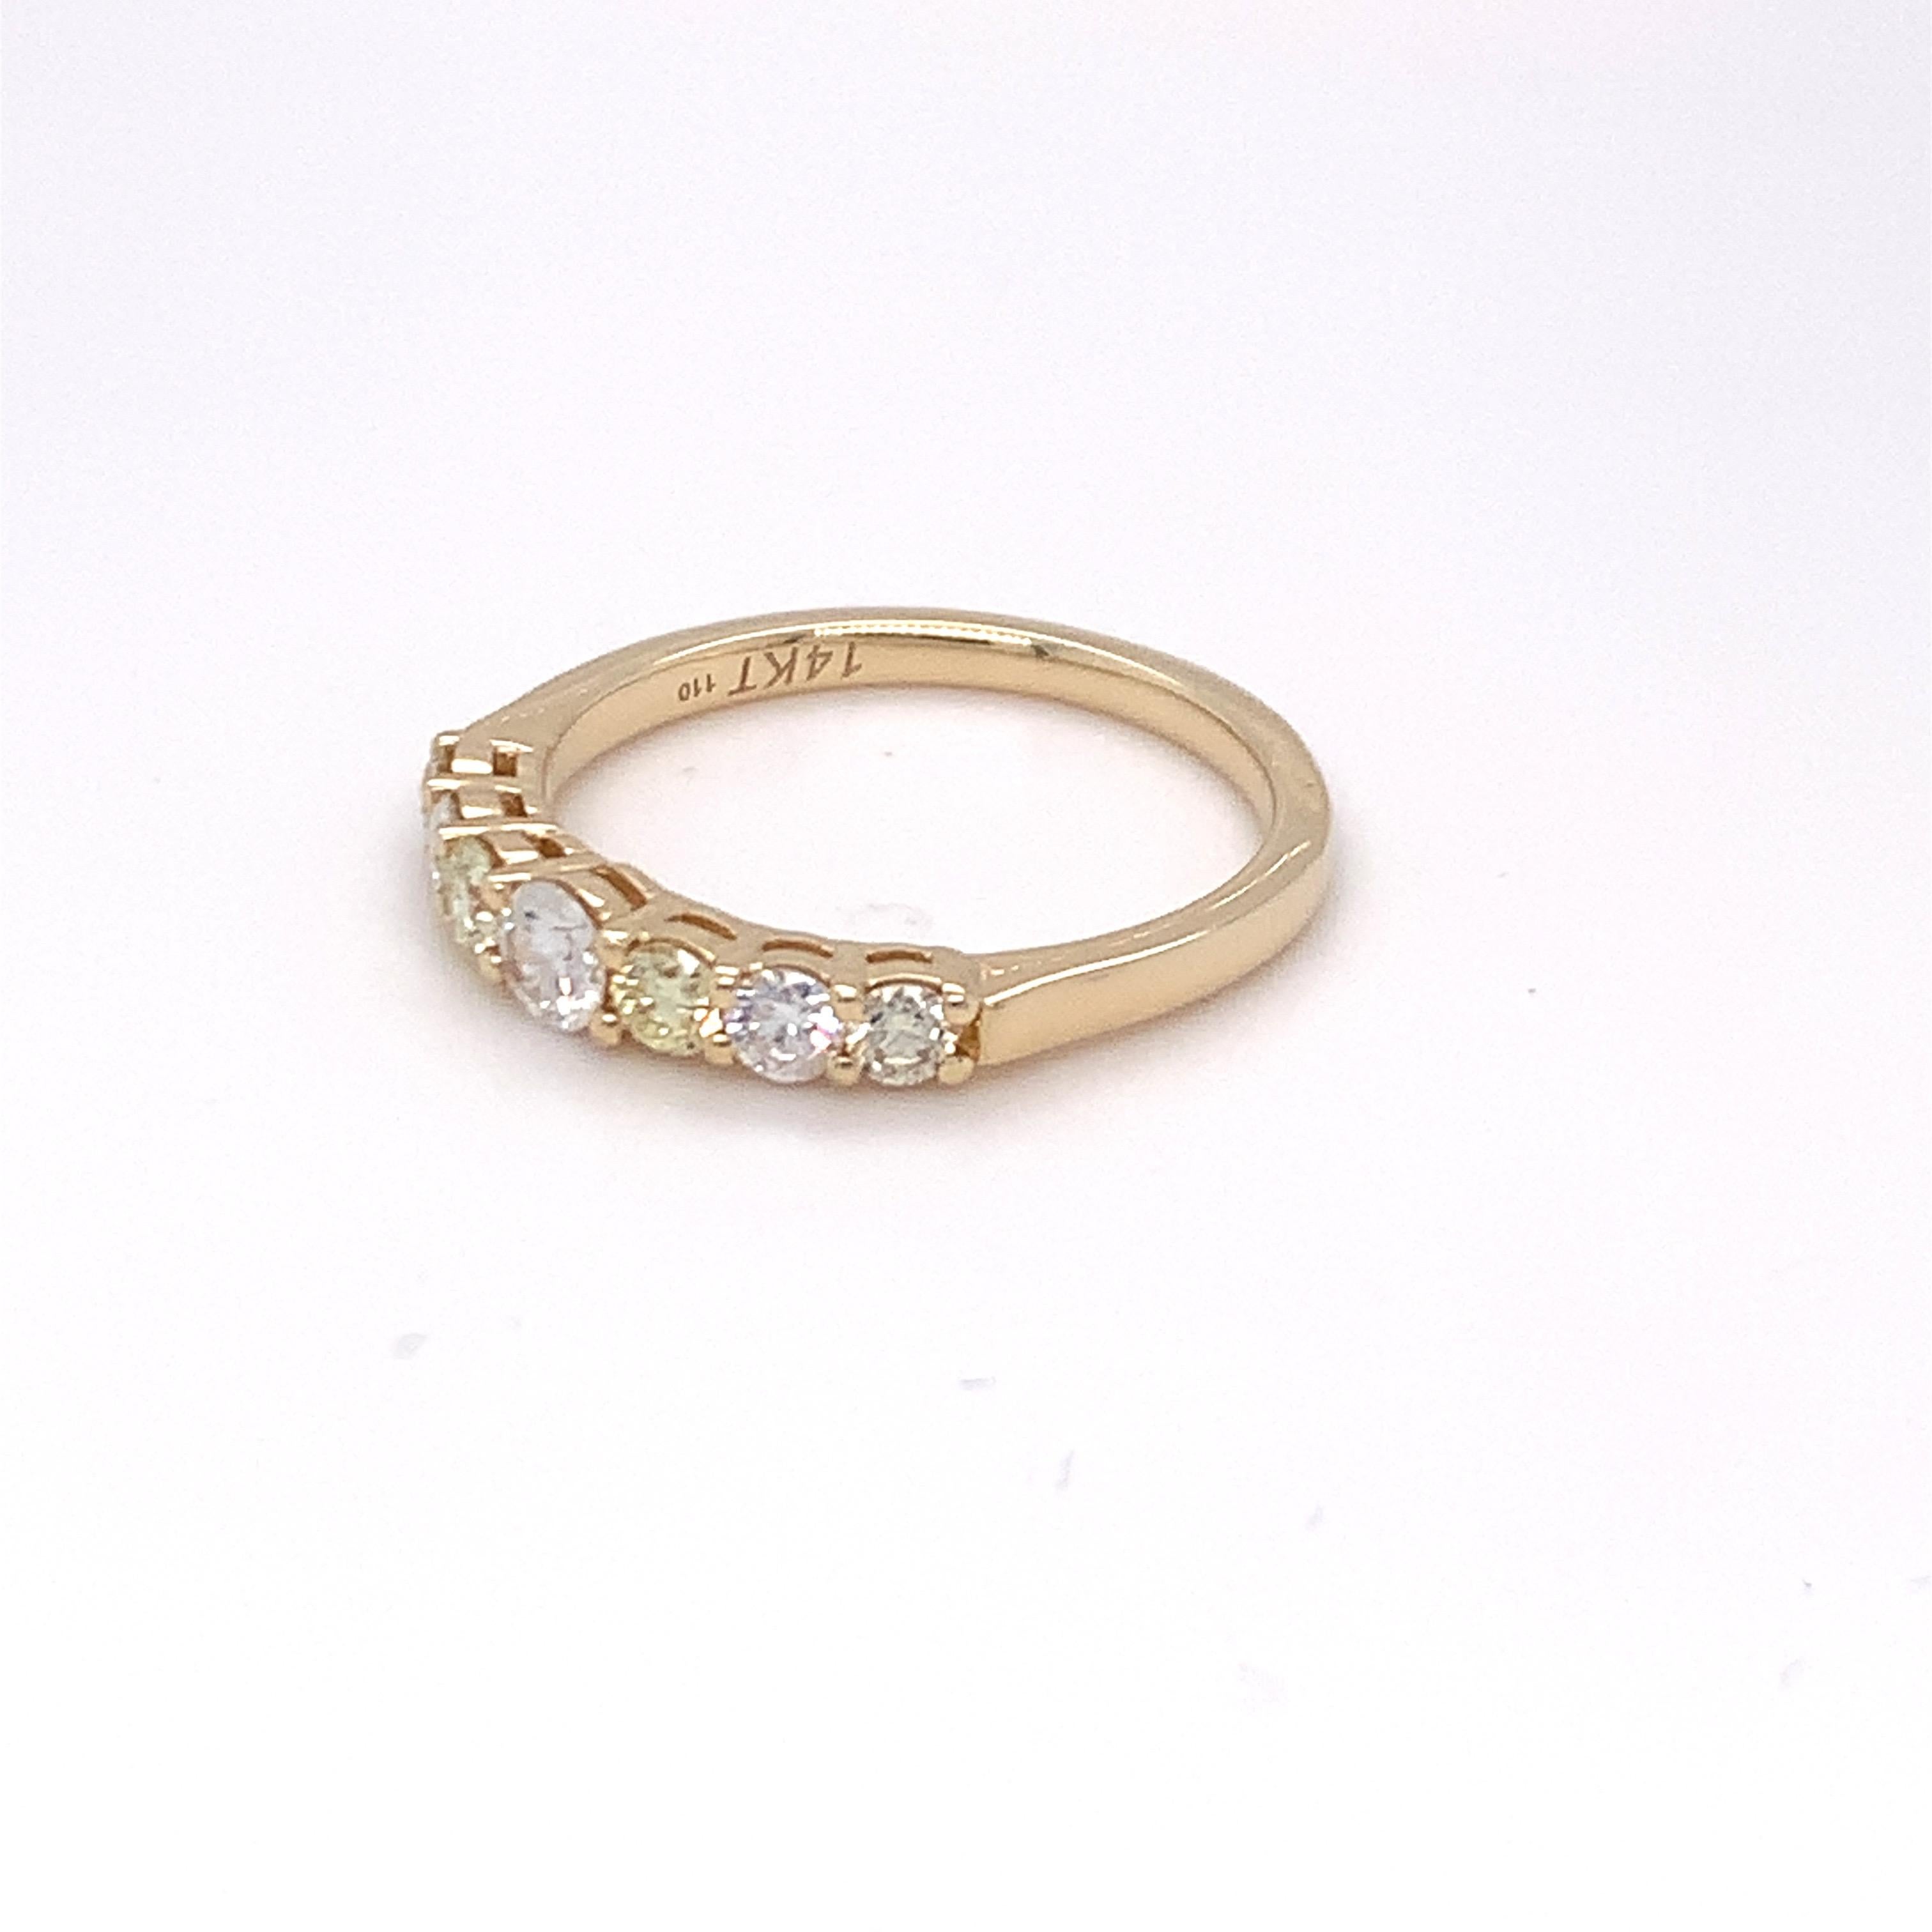 A combination of yellow and white diamonds makes this seven stone band a stunning piece of jewelry. Set in yellow gold and finished with skilled hands.
Yellow Diamond: 0.23ct
White Diamond: 0.22ct
Gold: 14K Yellow
Ring Size:7